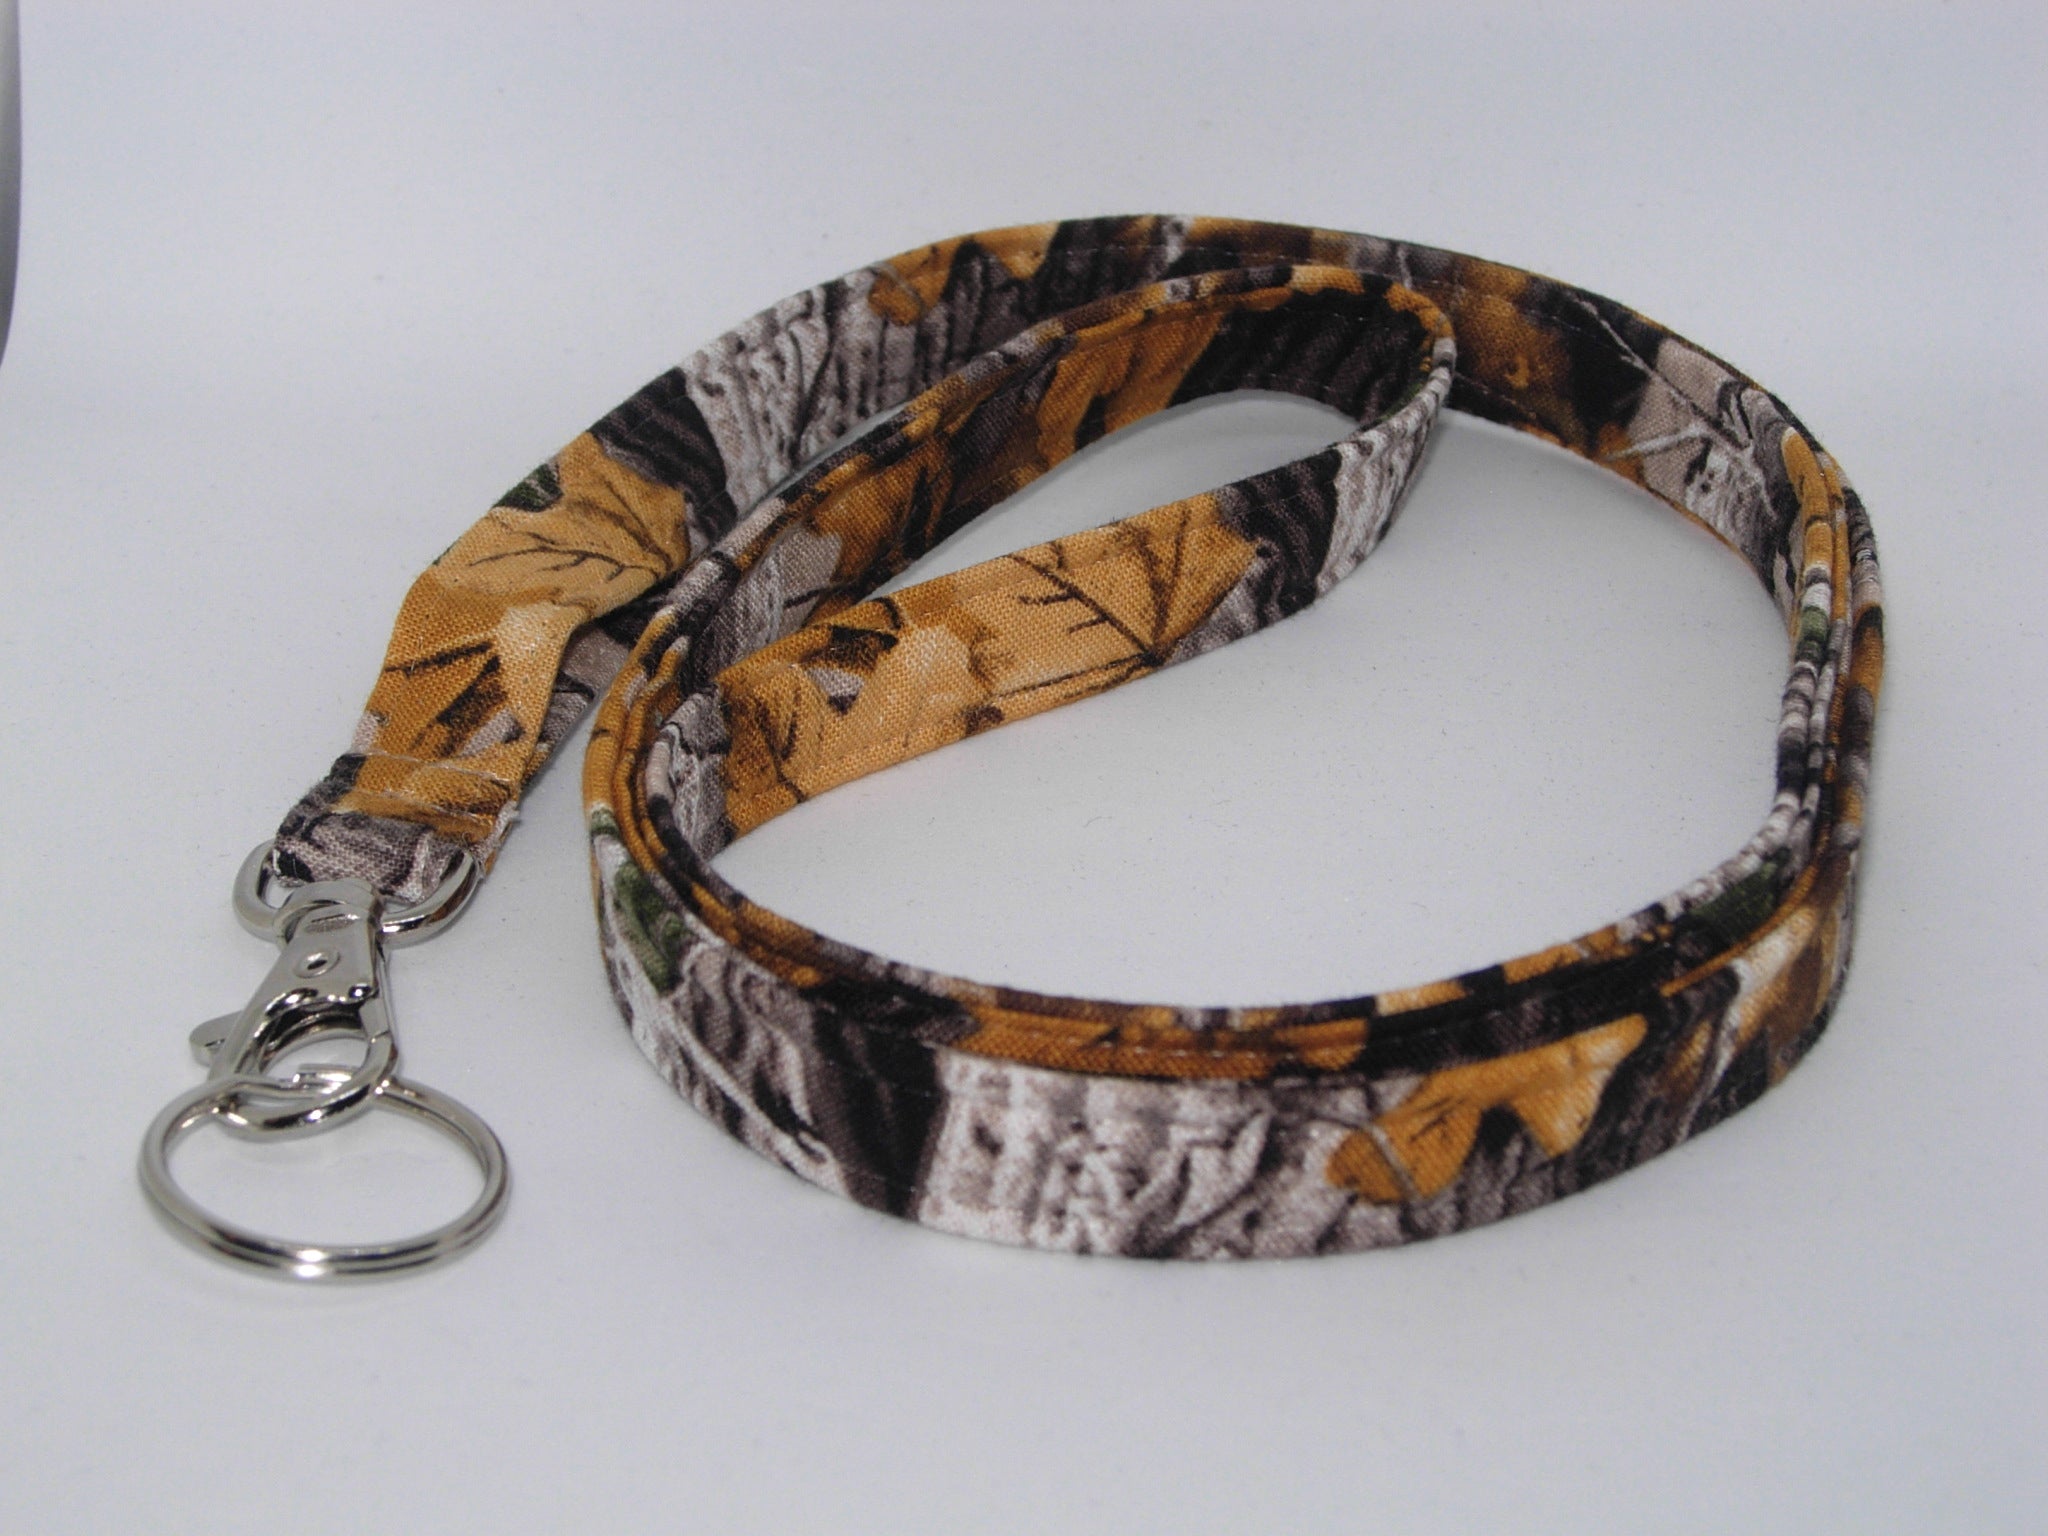 R & R Realtree APC Green Camo Pattern Hunting Breakaway Lanyard Keychain with Detachable Clasp, Adult Unisex, Size: 36